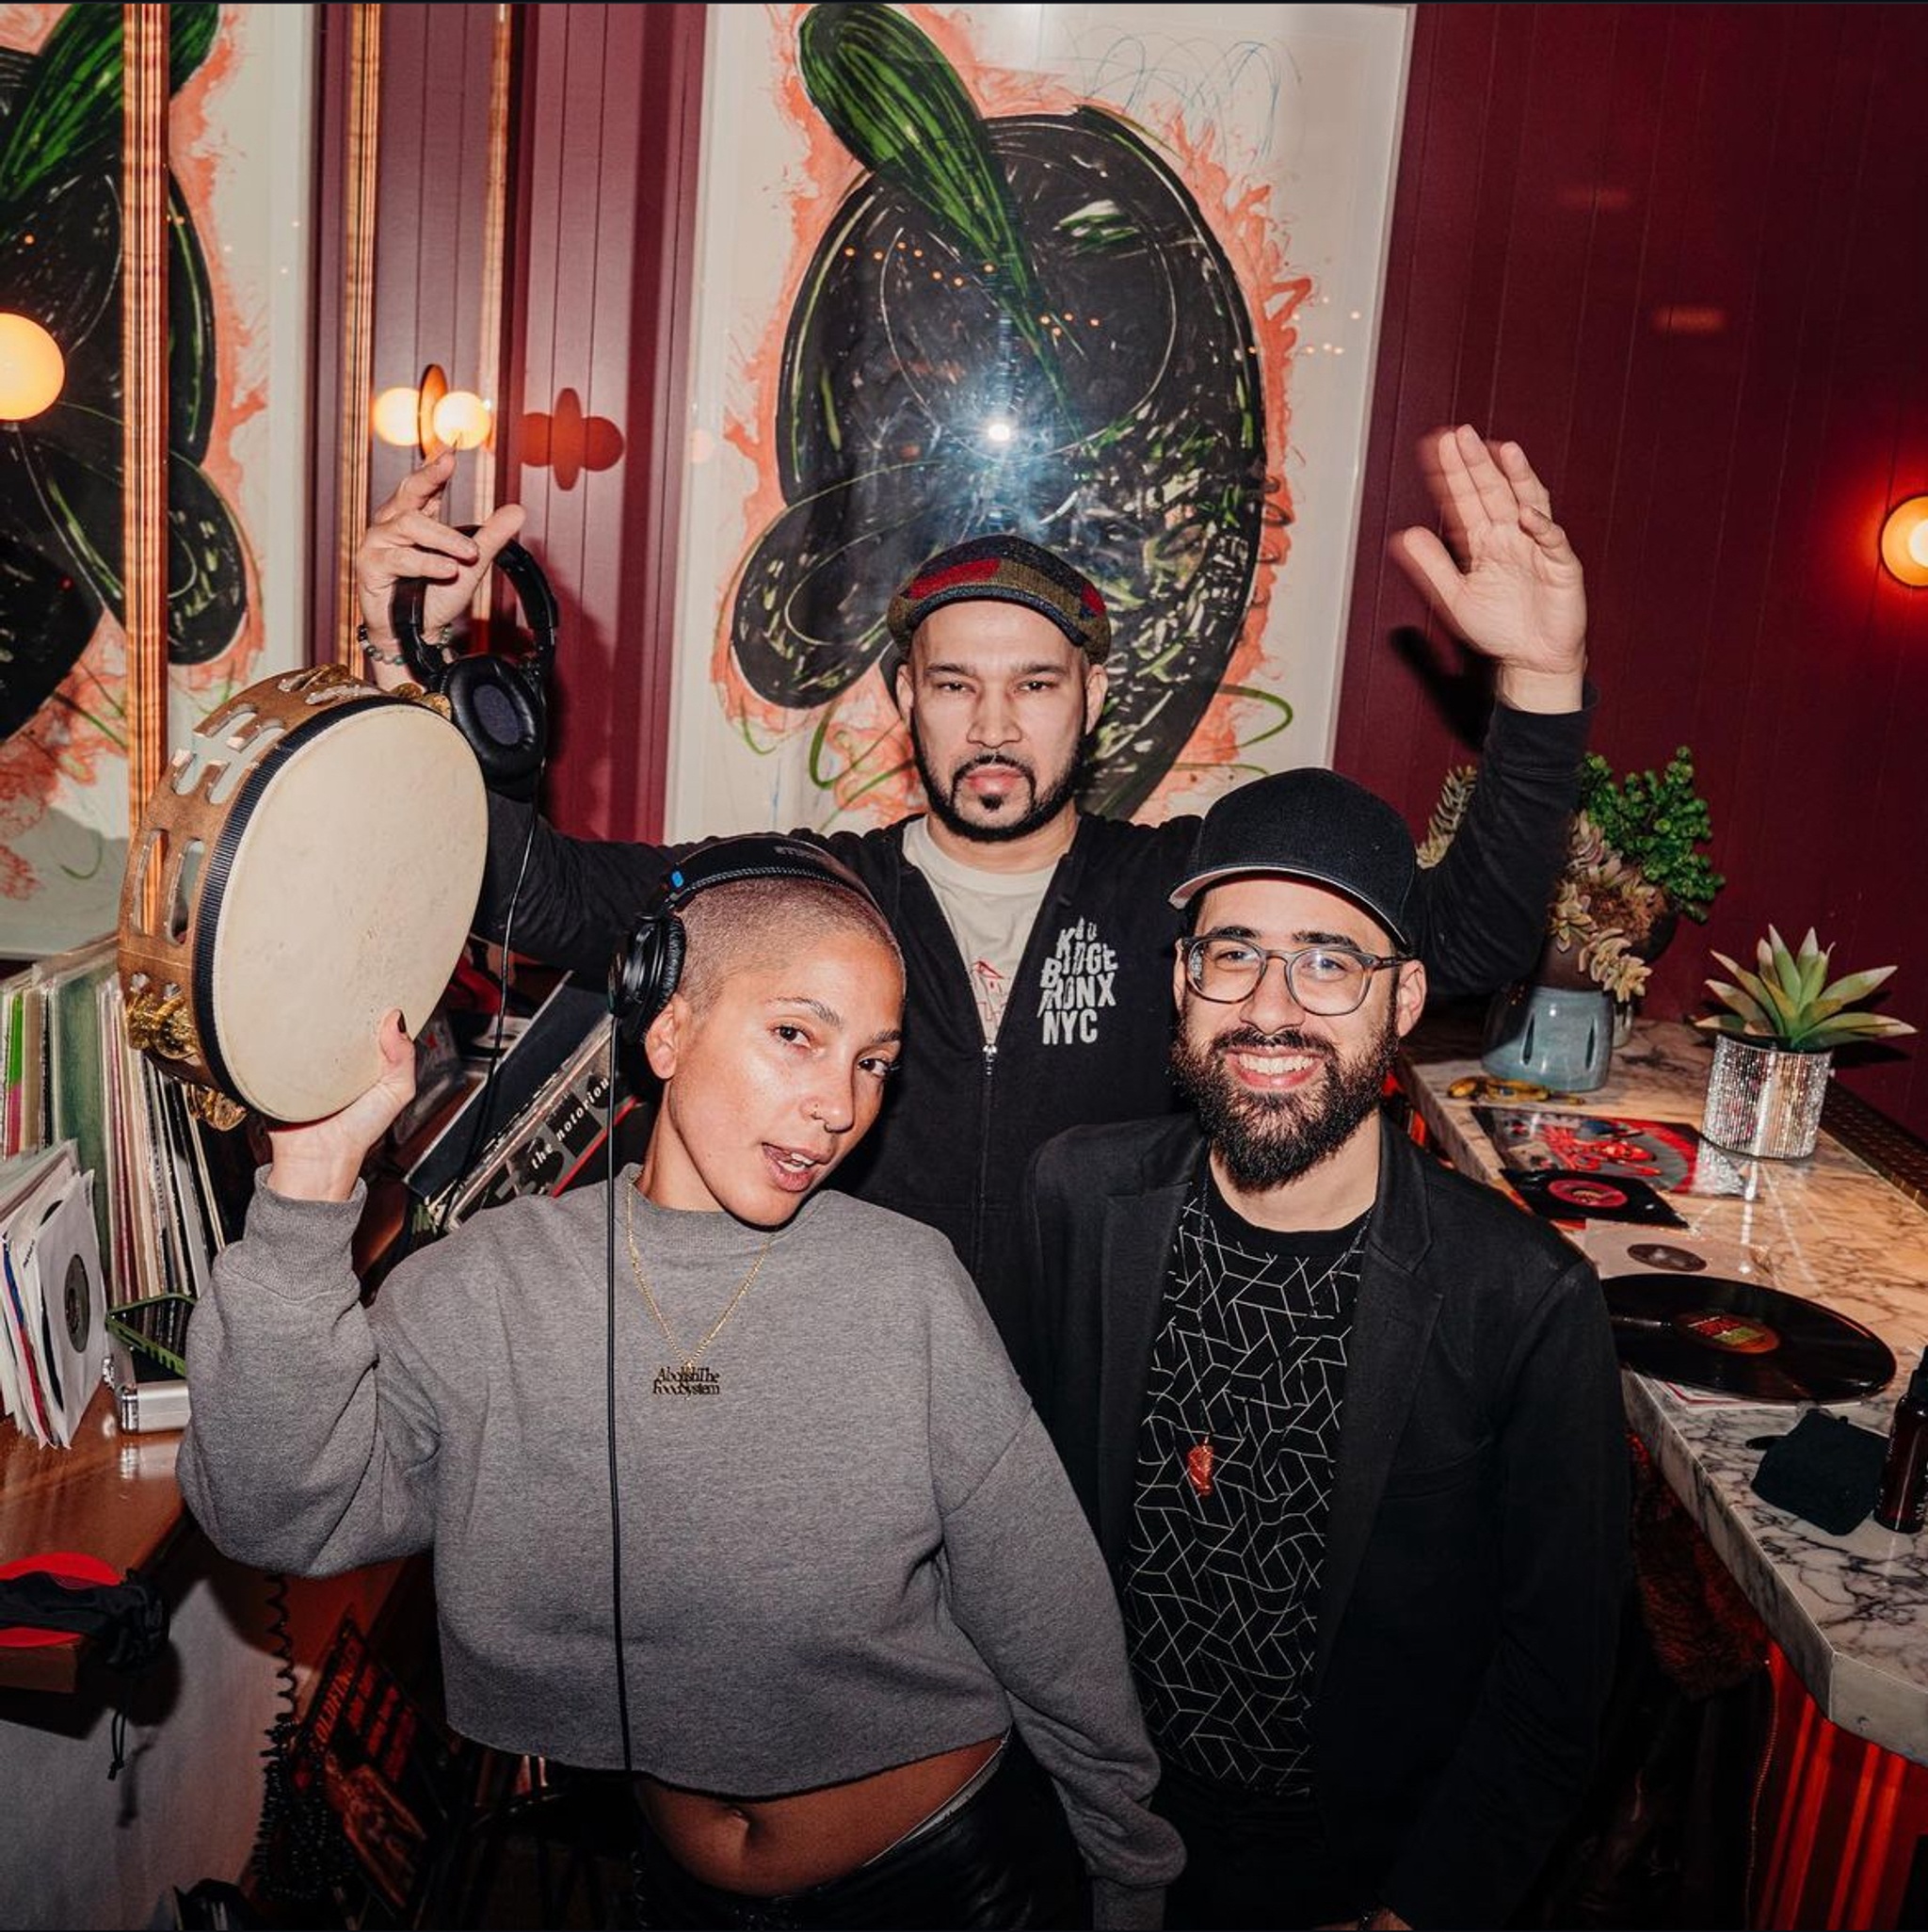 The three DJs of Uptown Vinyl Supreme, Sunny Cheeba, Buddy, and Josh Hubi, stand together in a DJ booth. They smile and raise their hands, holding headphones and tambourines. 